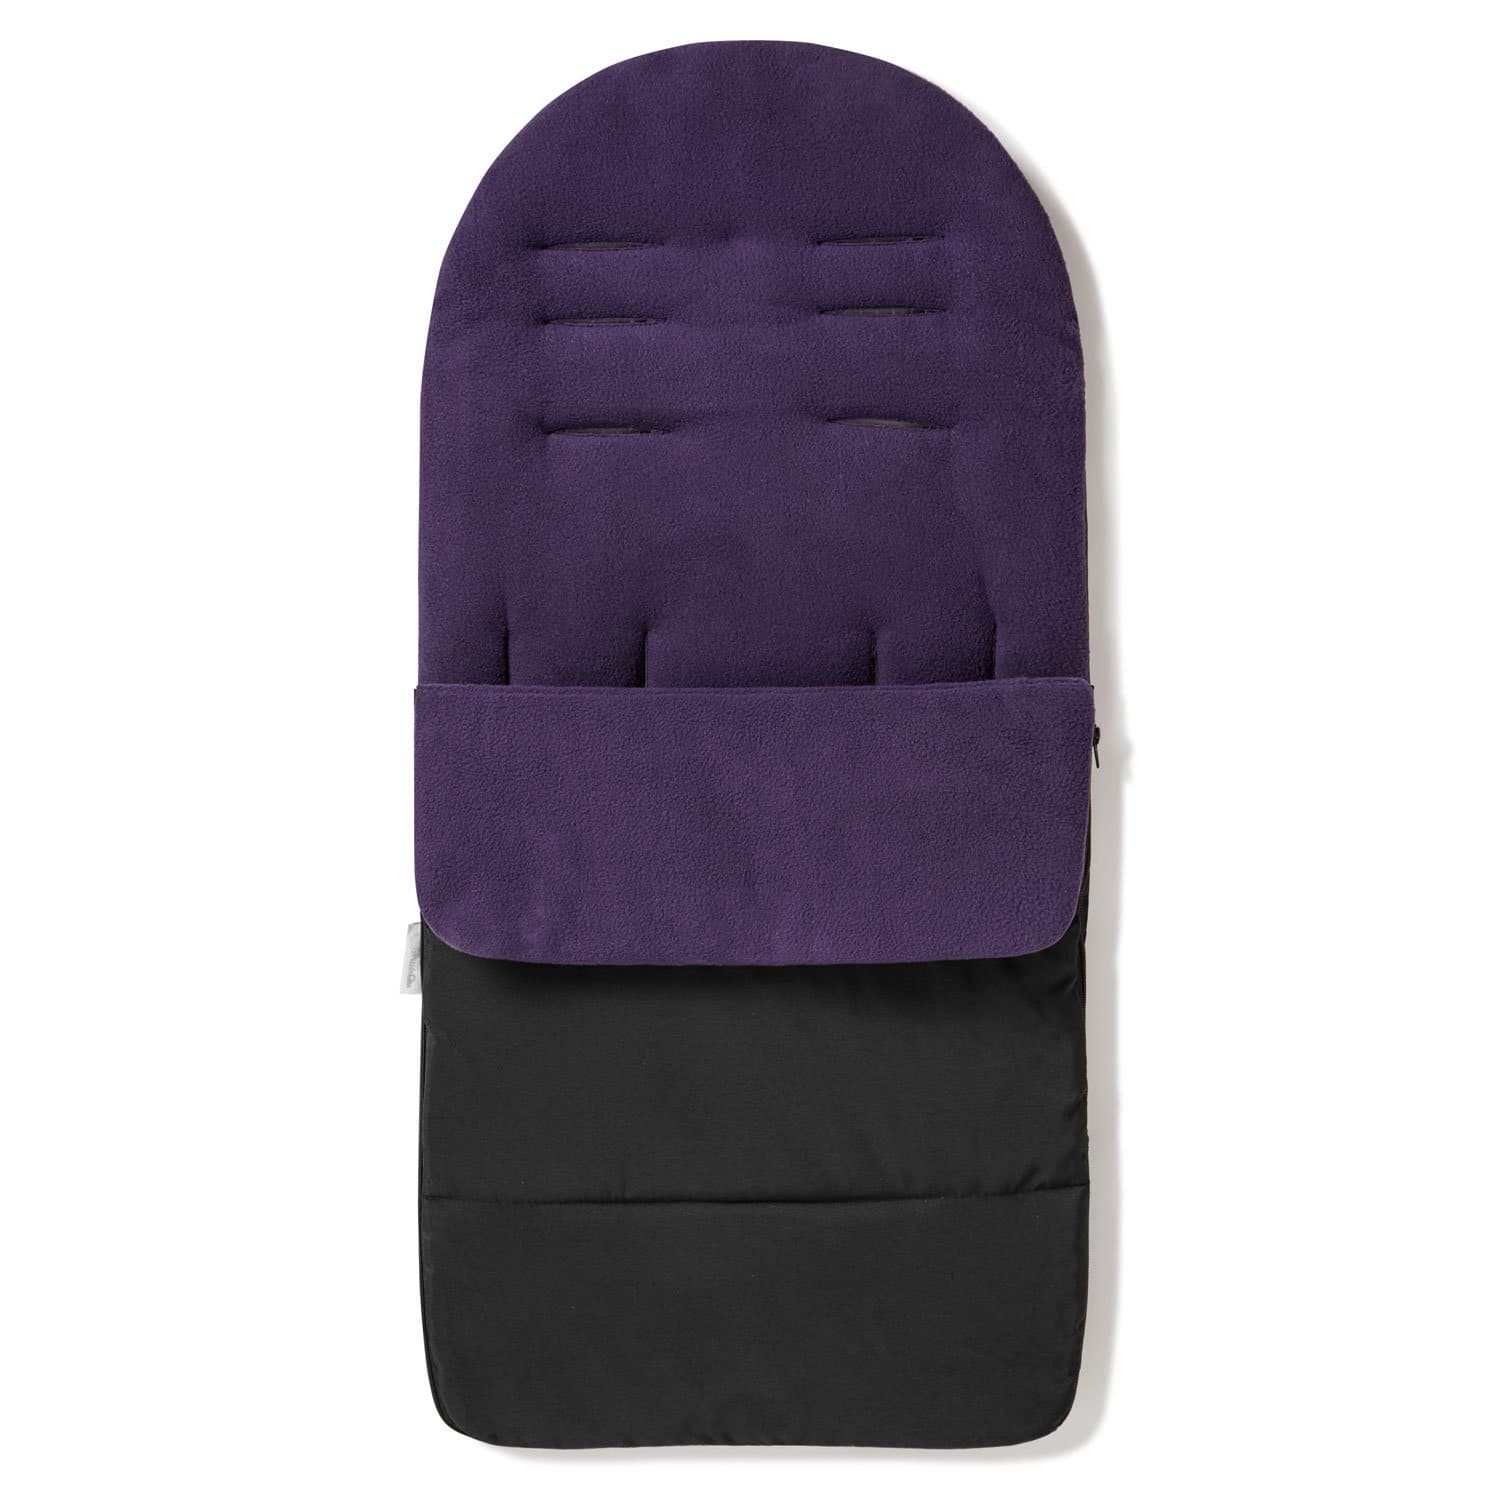 Premium Footmuff / Cosy Toes Compatible with Kiddy - Plum Purple / Fits All Models | For Your Little One